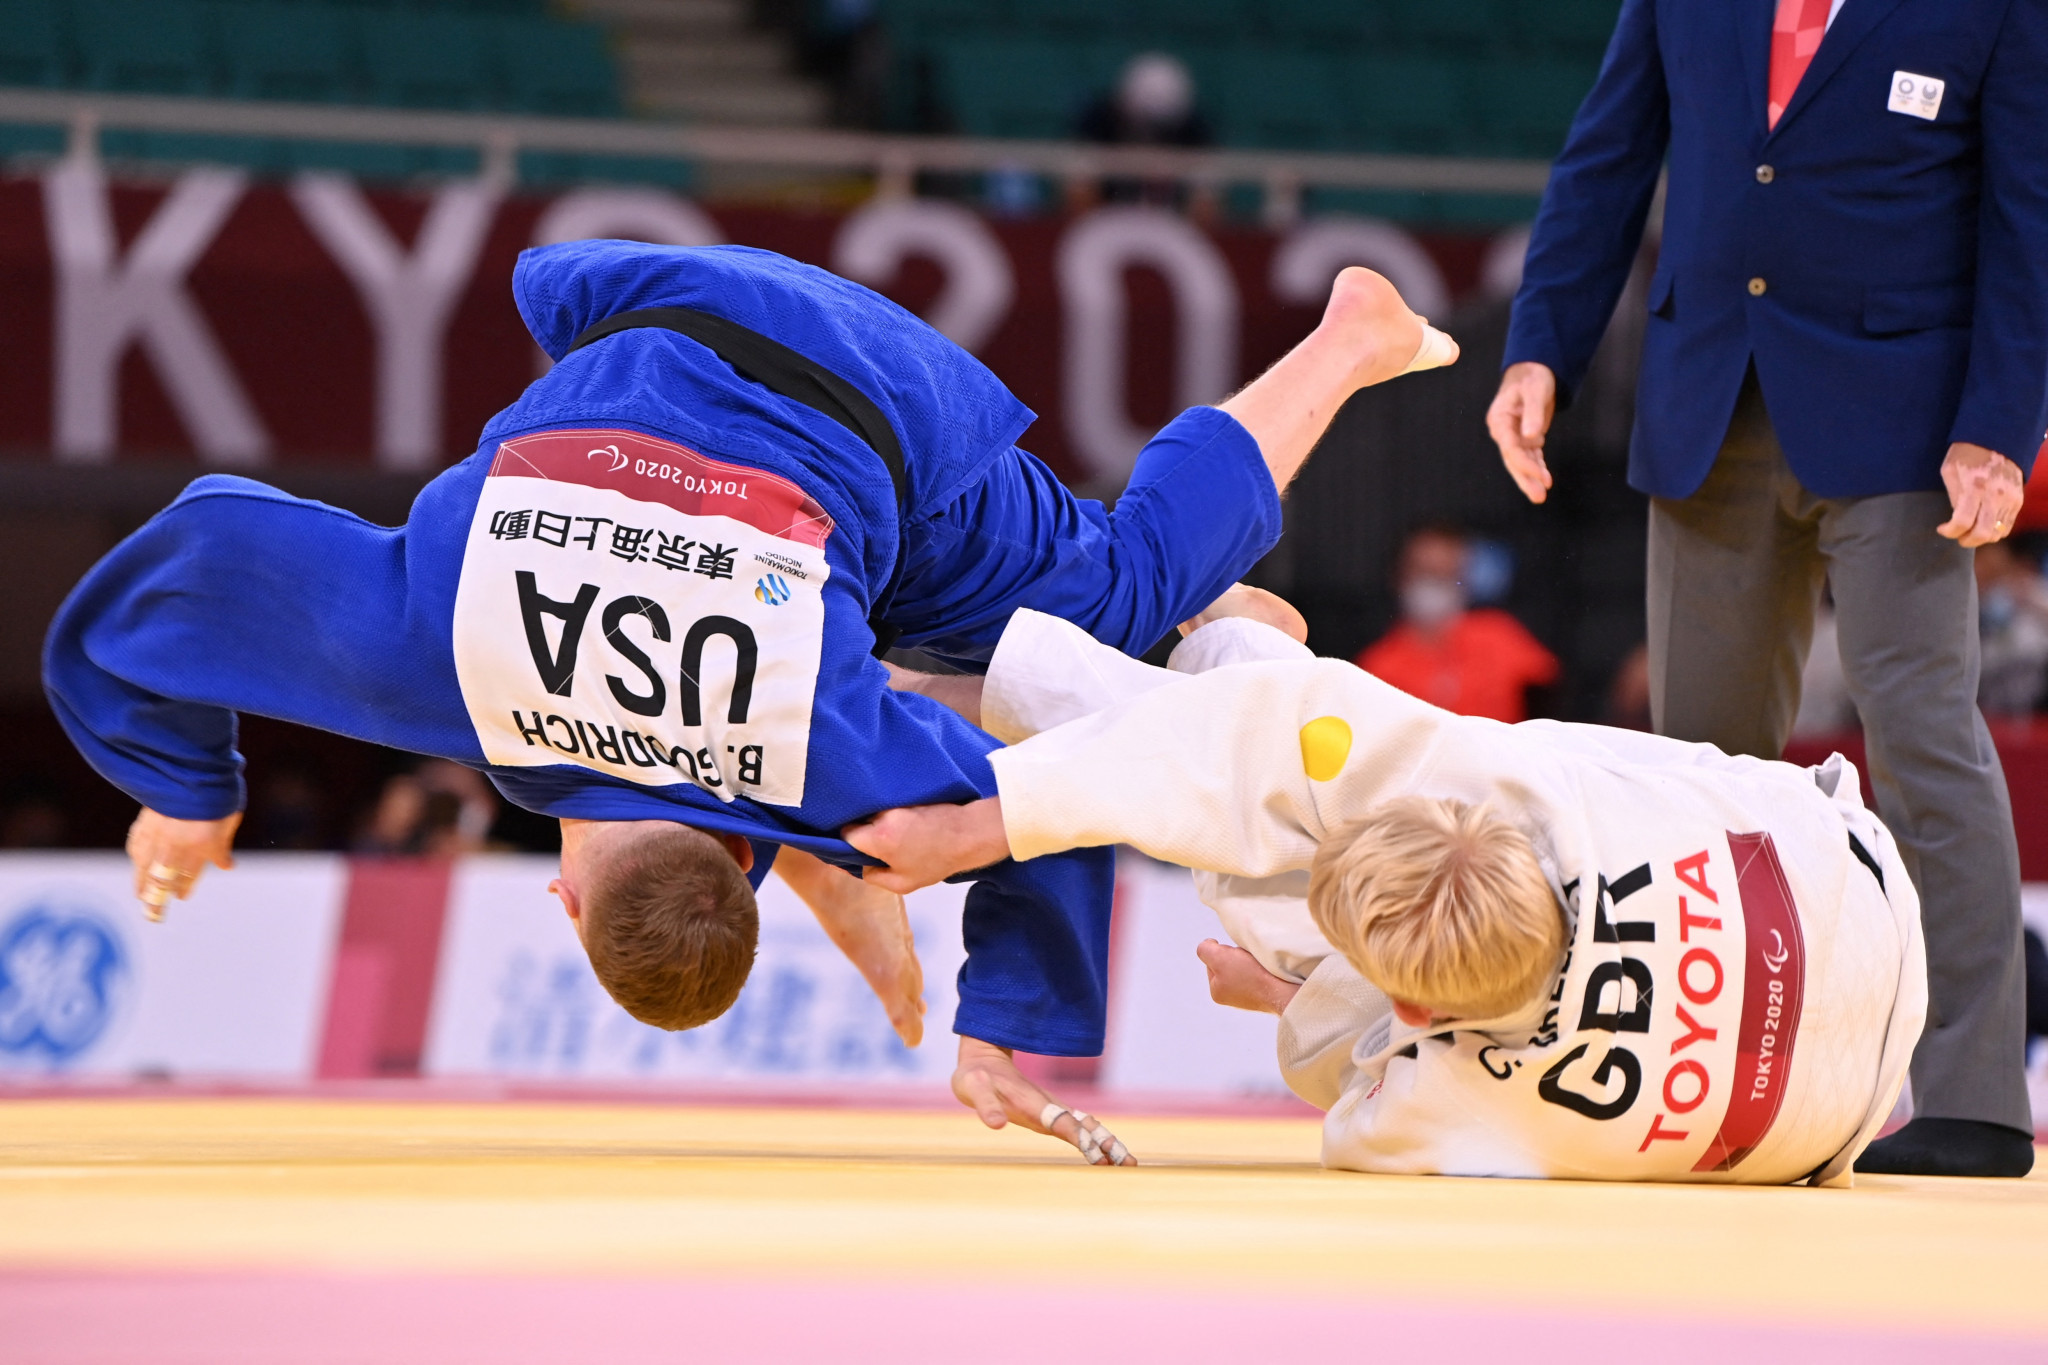 Judo federations of France and United States team up for Paris 2024 and LA 2028 preparations